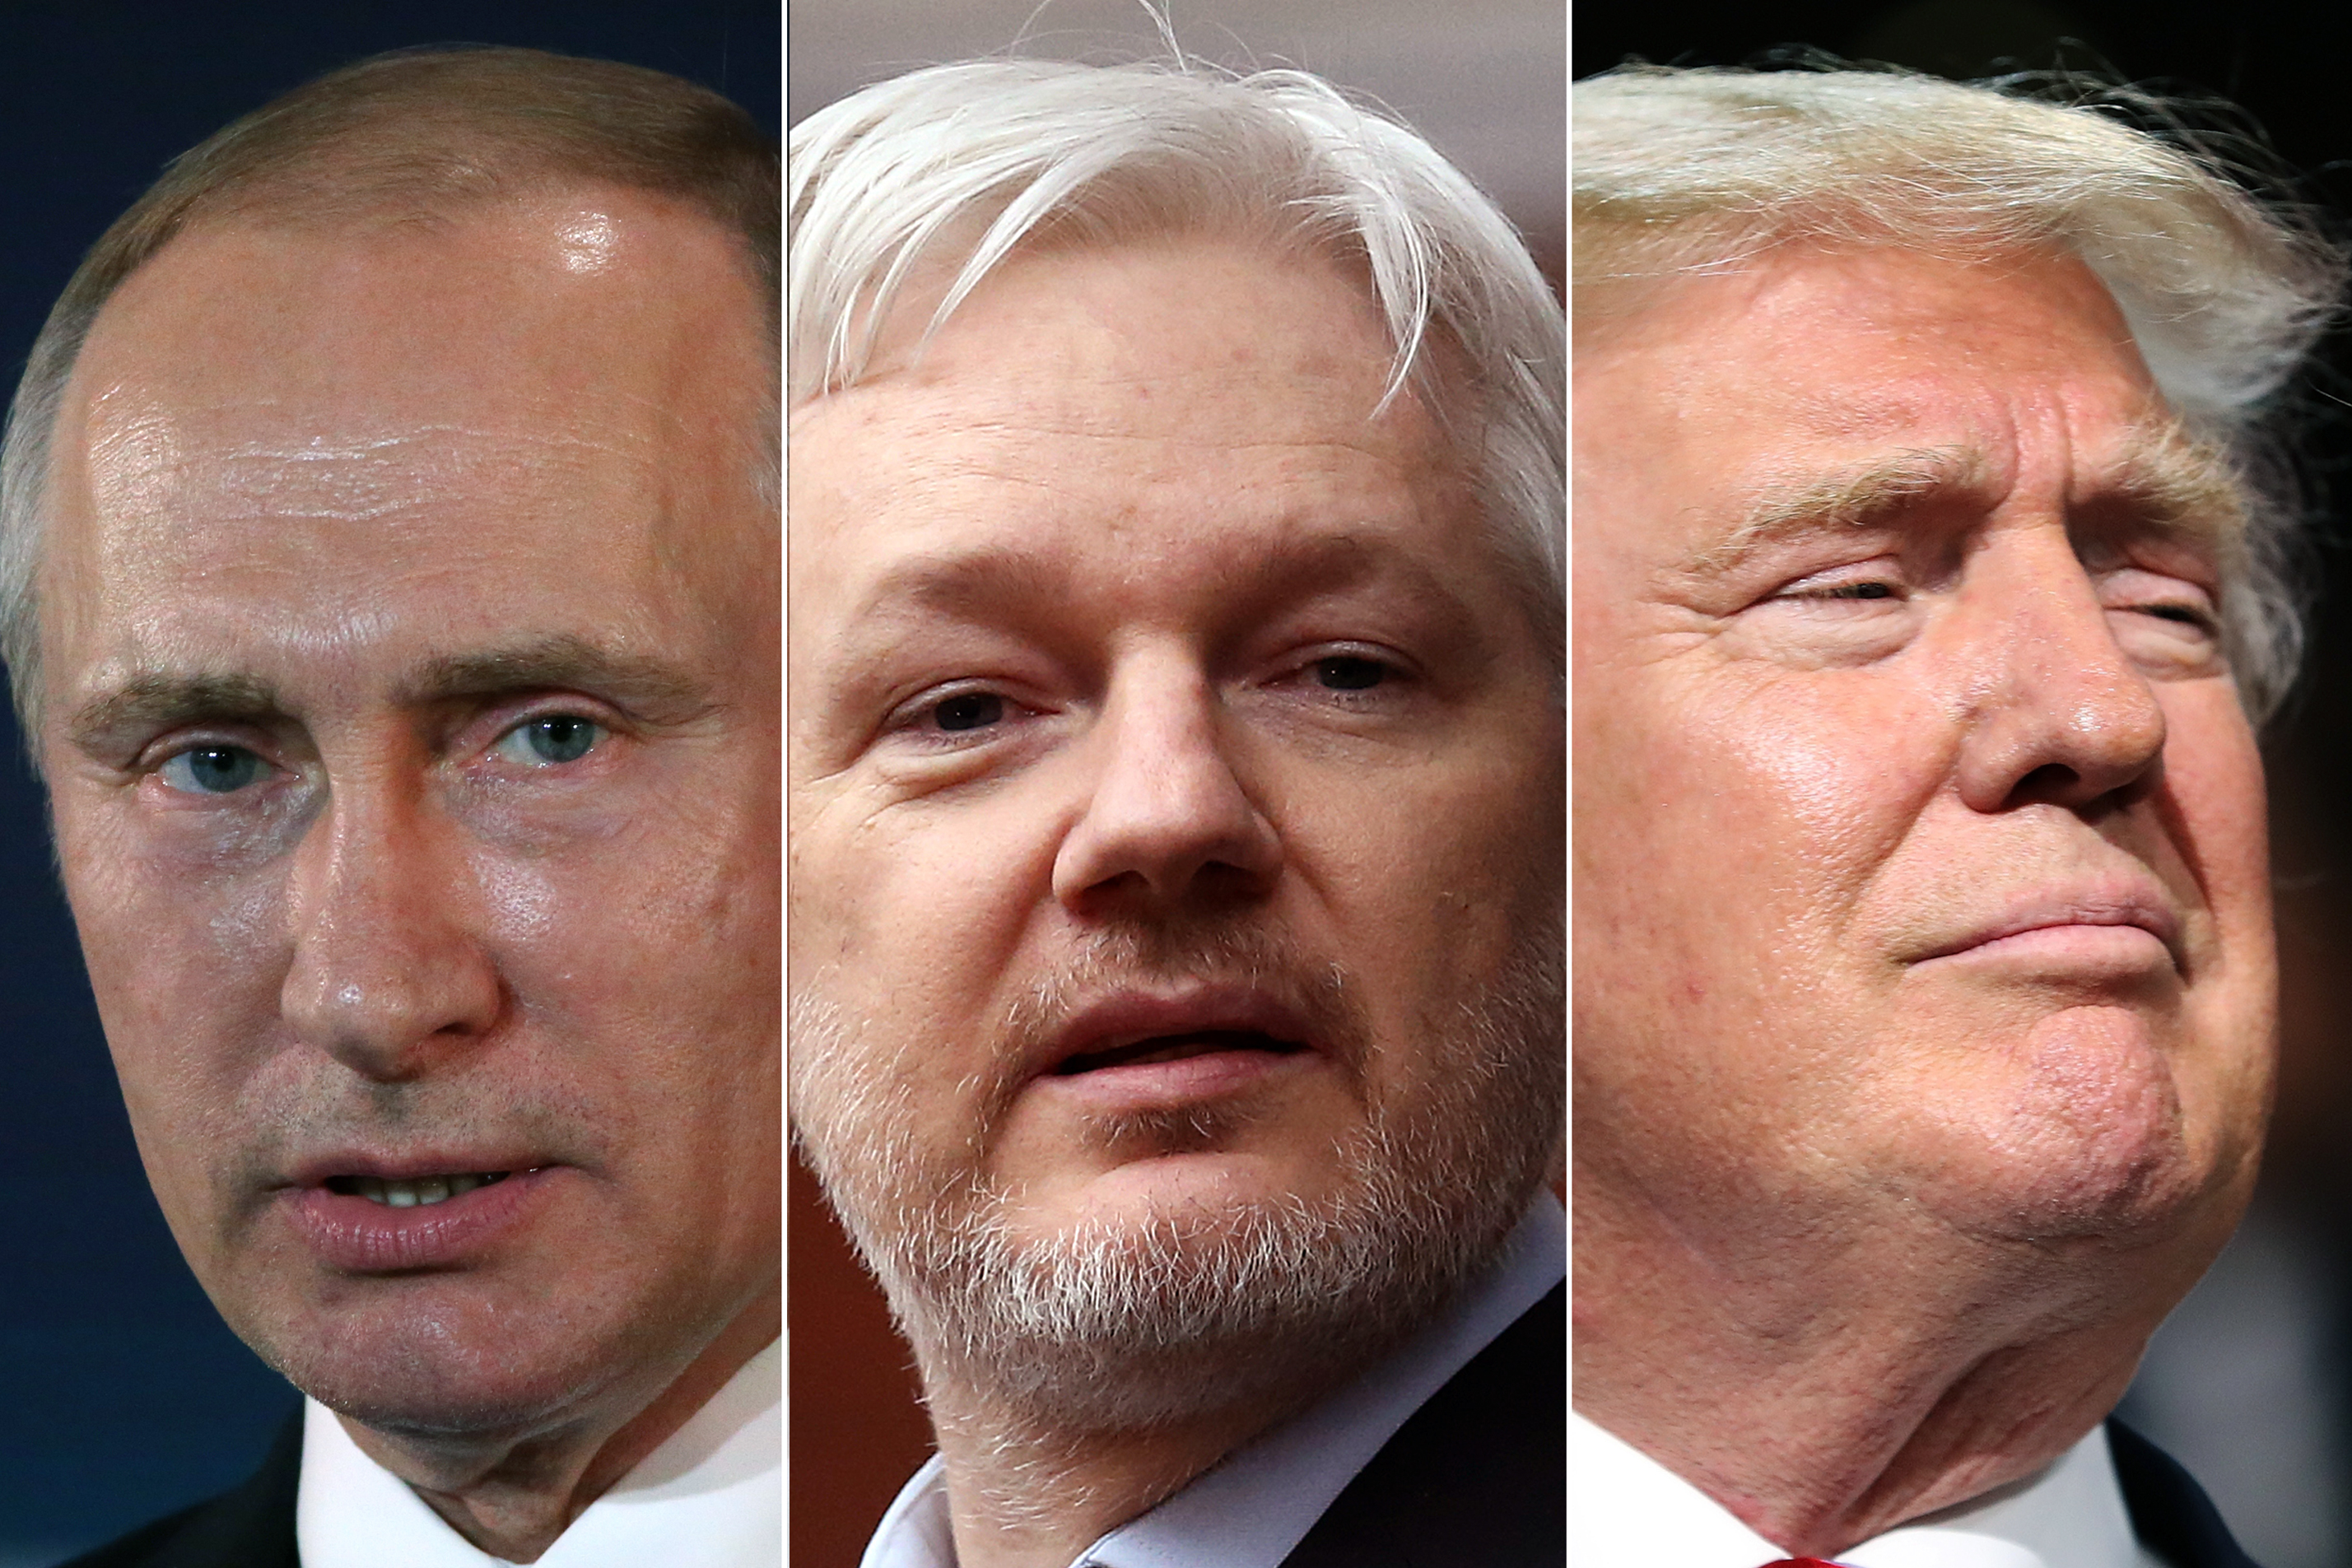 Vladimir Putin in Moscow, in July 2016 (L); Julian Assange in the balcony of the Ecuadorian Embassy in London, in Feb. 2016 (C); Donald Trump in Cleveland, OH, in July 2016 (R). (Getty Images (3))